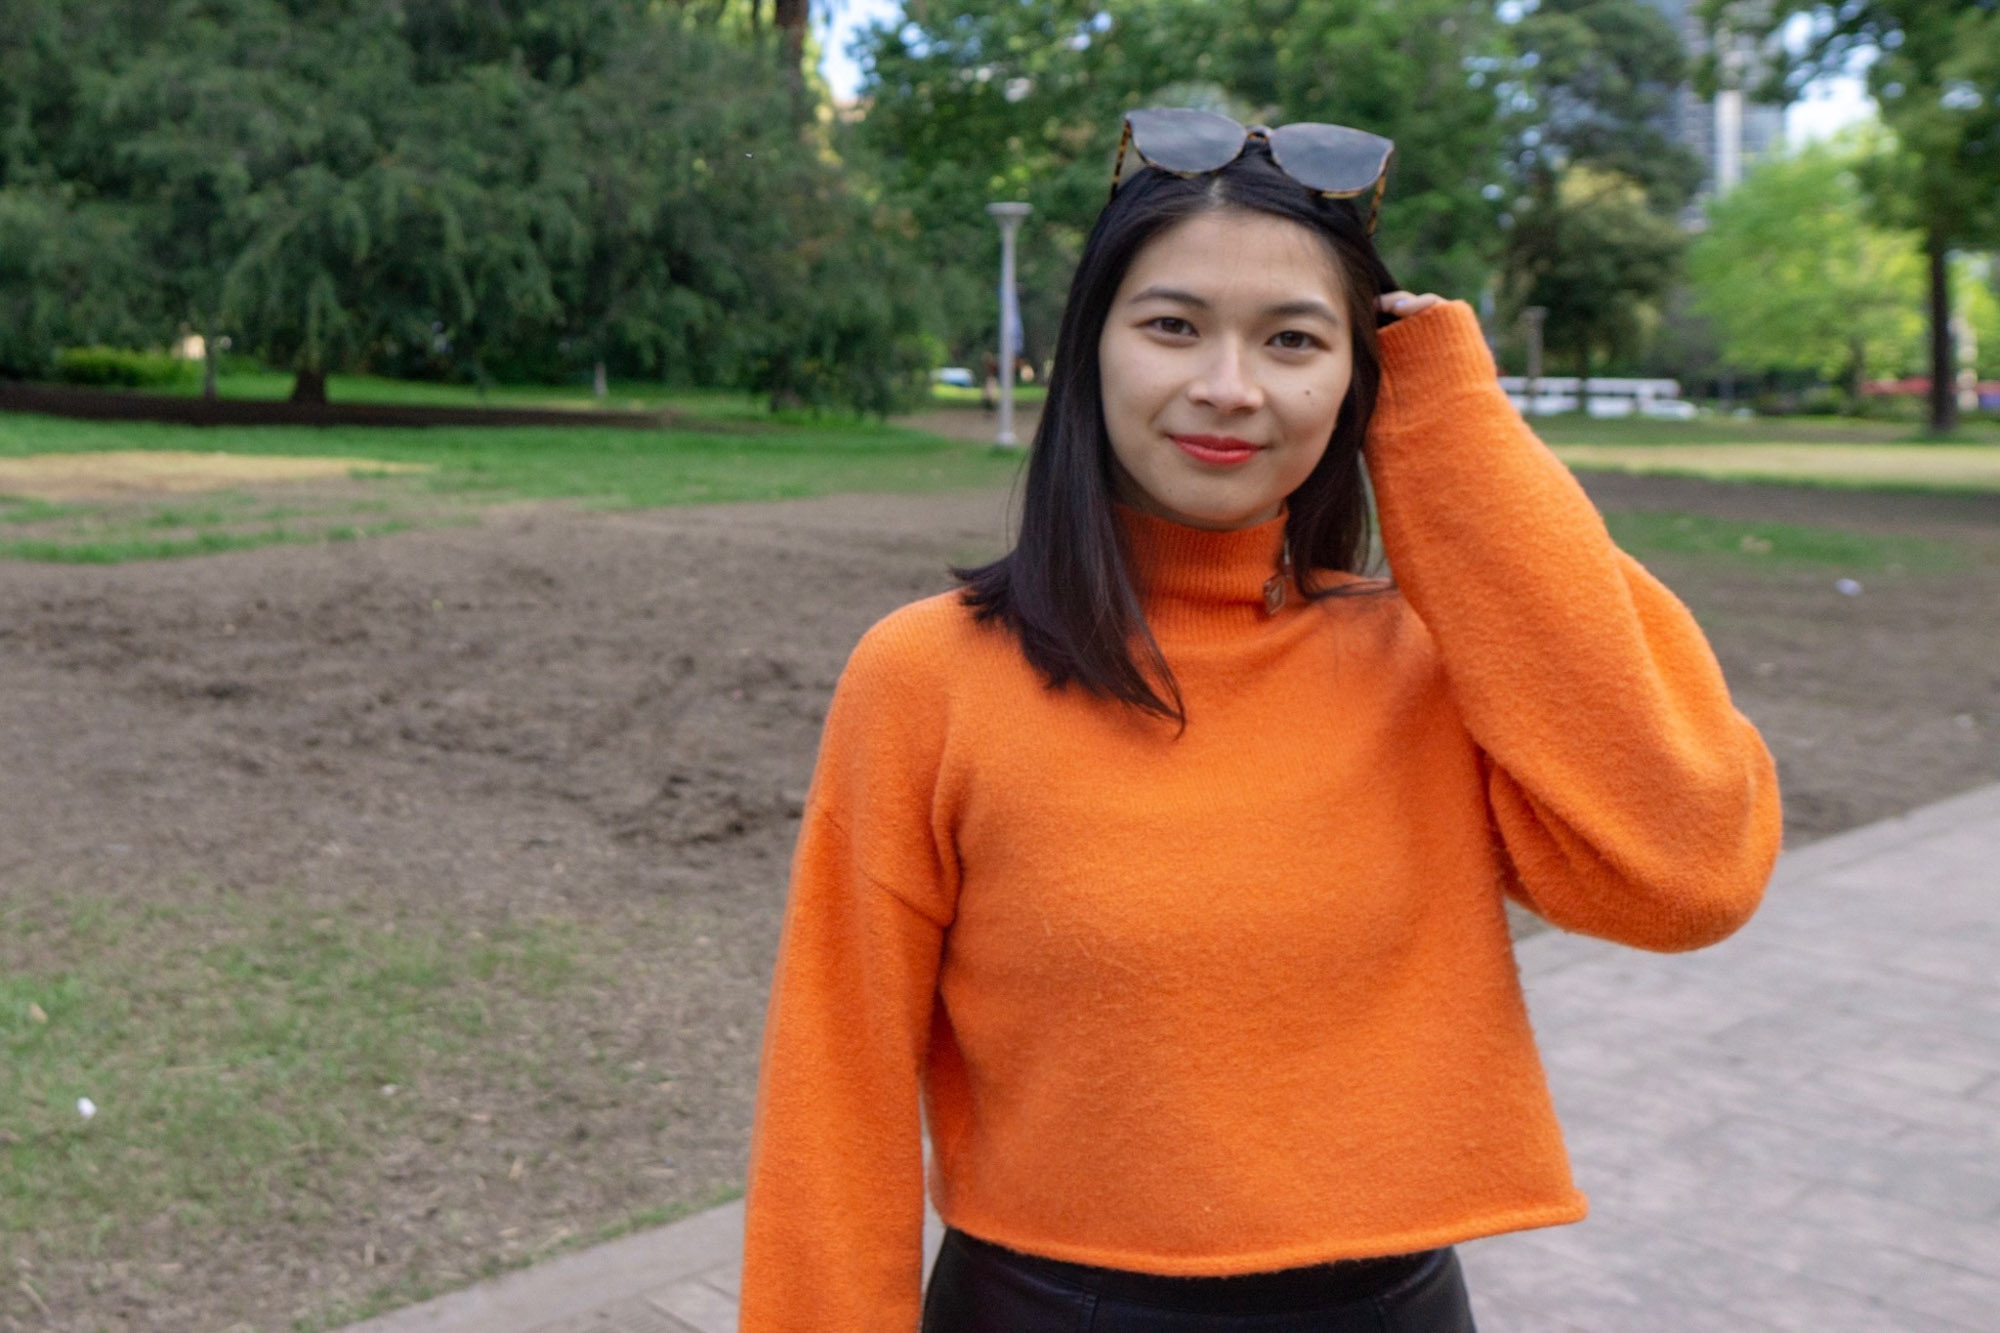 A medium shot of a woman wearing an orange turtleneck sweater. She is tucking hair behind her ears and she has sunglasses on her head